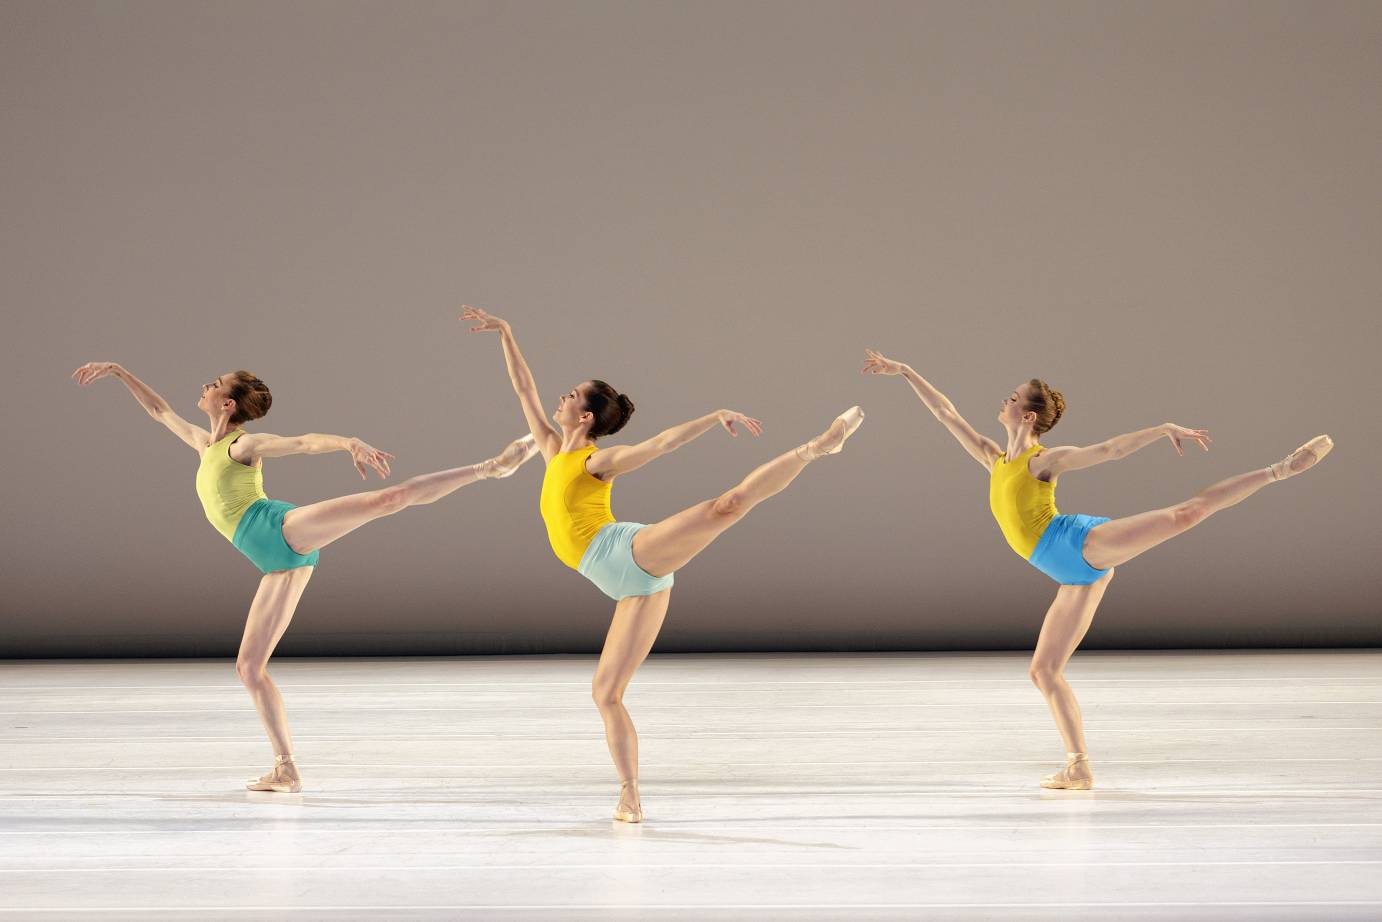 a trio of women bare-legged and bare arms wearing variations of yellow tank tops and blue green bottoms all in exquiste arabesques. Very high legs very upwardly reaching arms. Exuberant